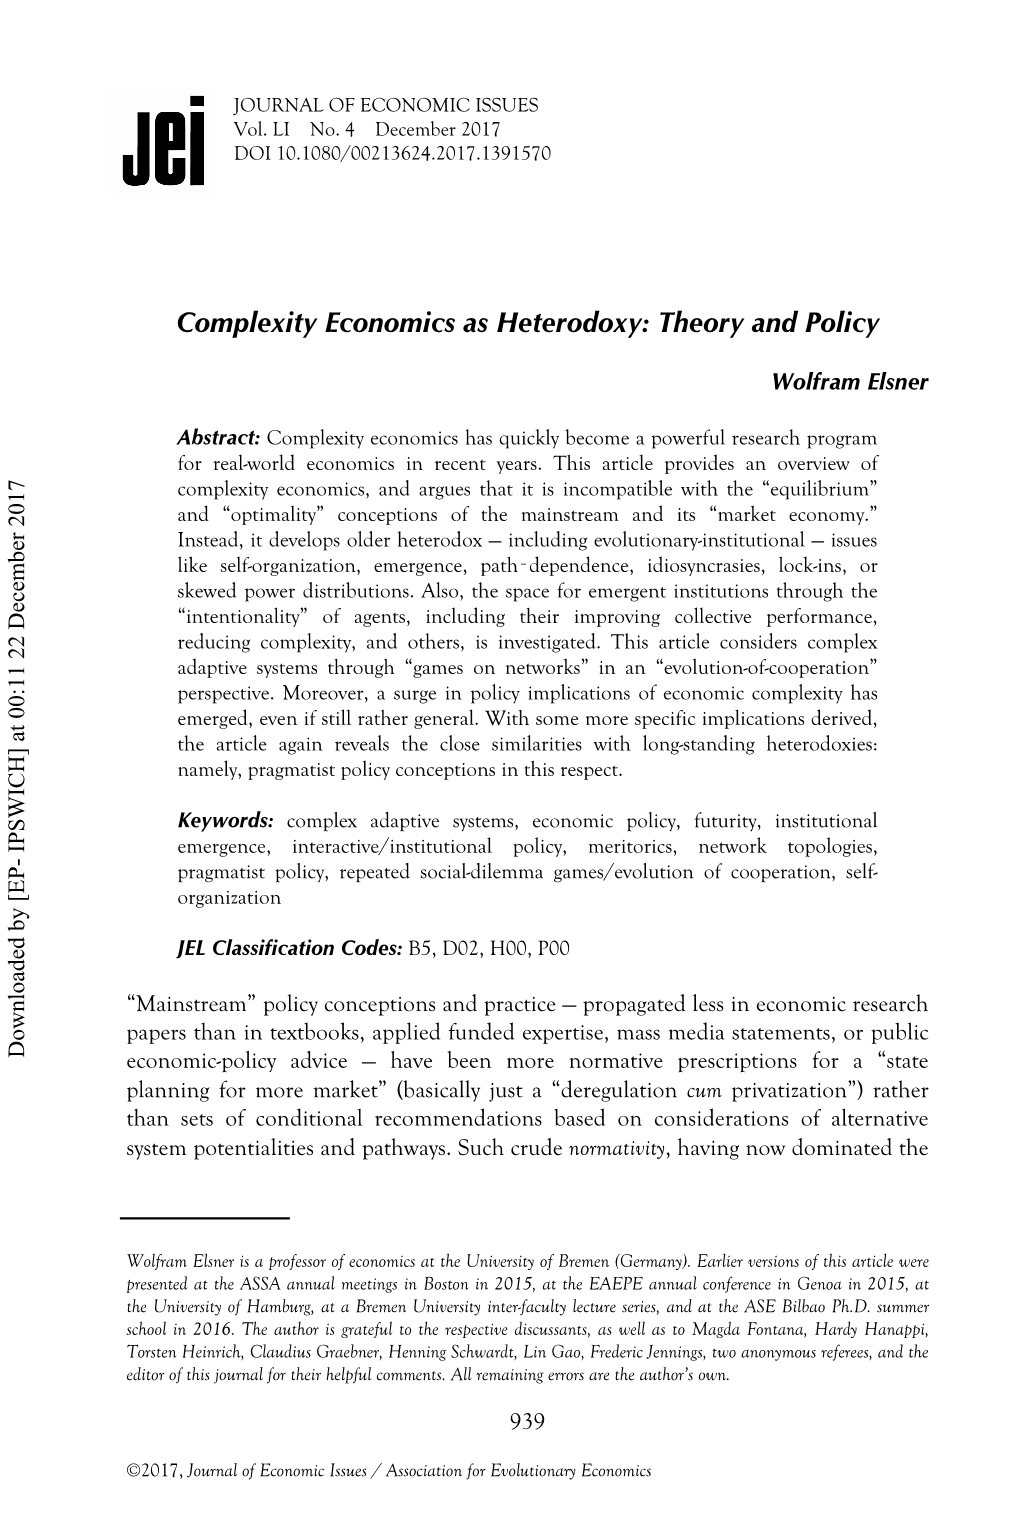 Complexity Economics As Heterodoxy: Theory and Policy